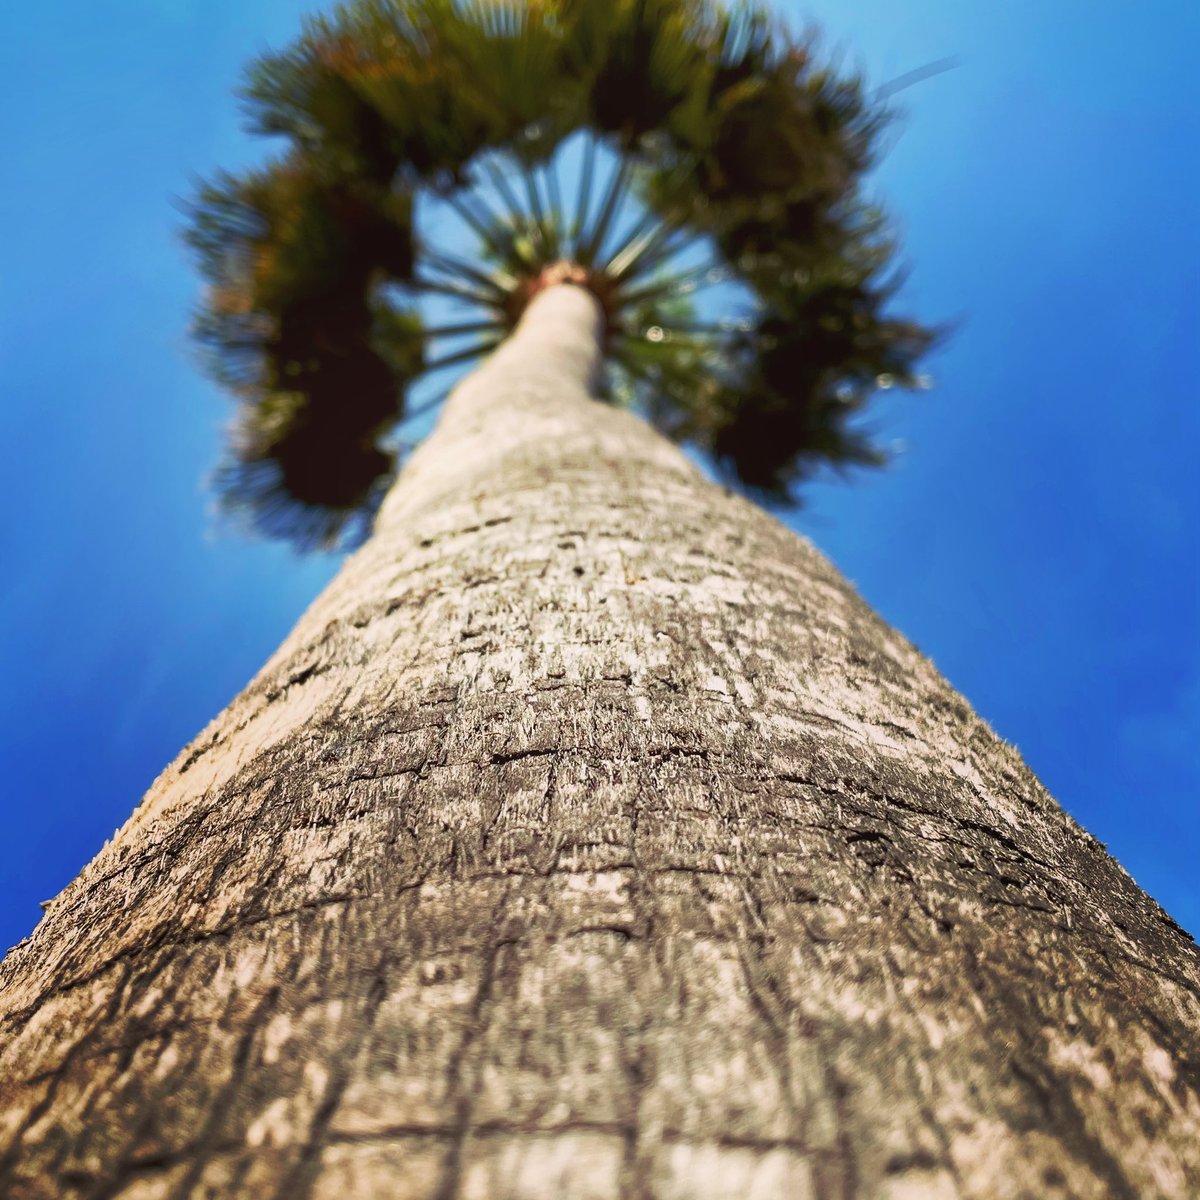 Tall. 

#Cannes #cotedazurfrance #tall #cannesavance #palmtrees #palmbeach #palma #visitCannes #dreambig #standtall #immovable #cannes2023 #instaCannes #iloveCannes #mipim #canneslions #filmfestival